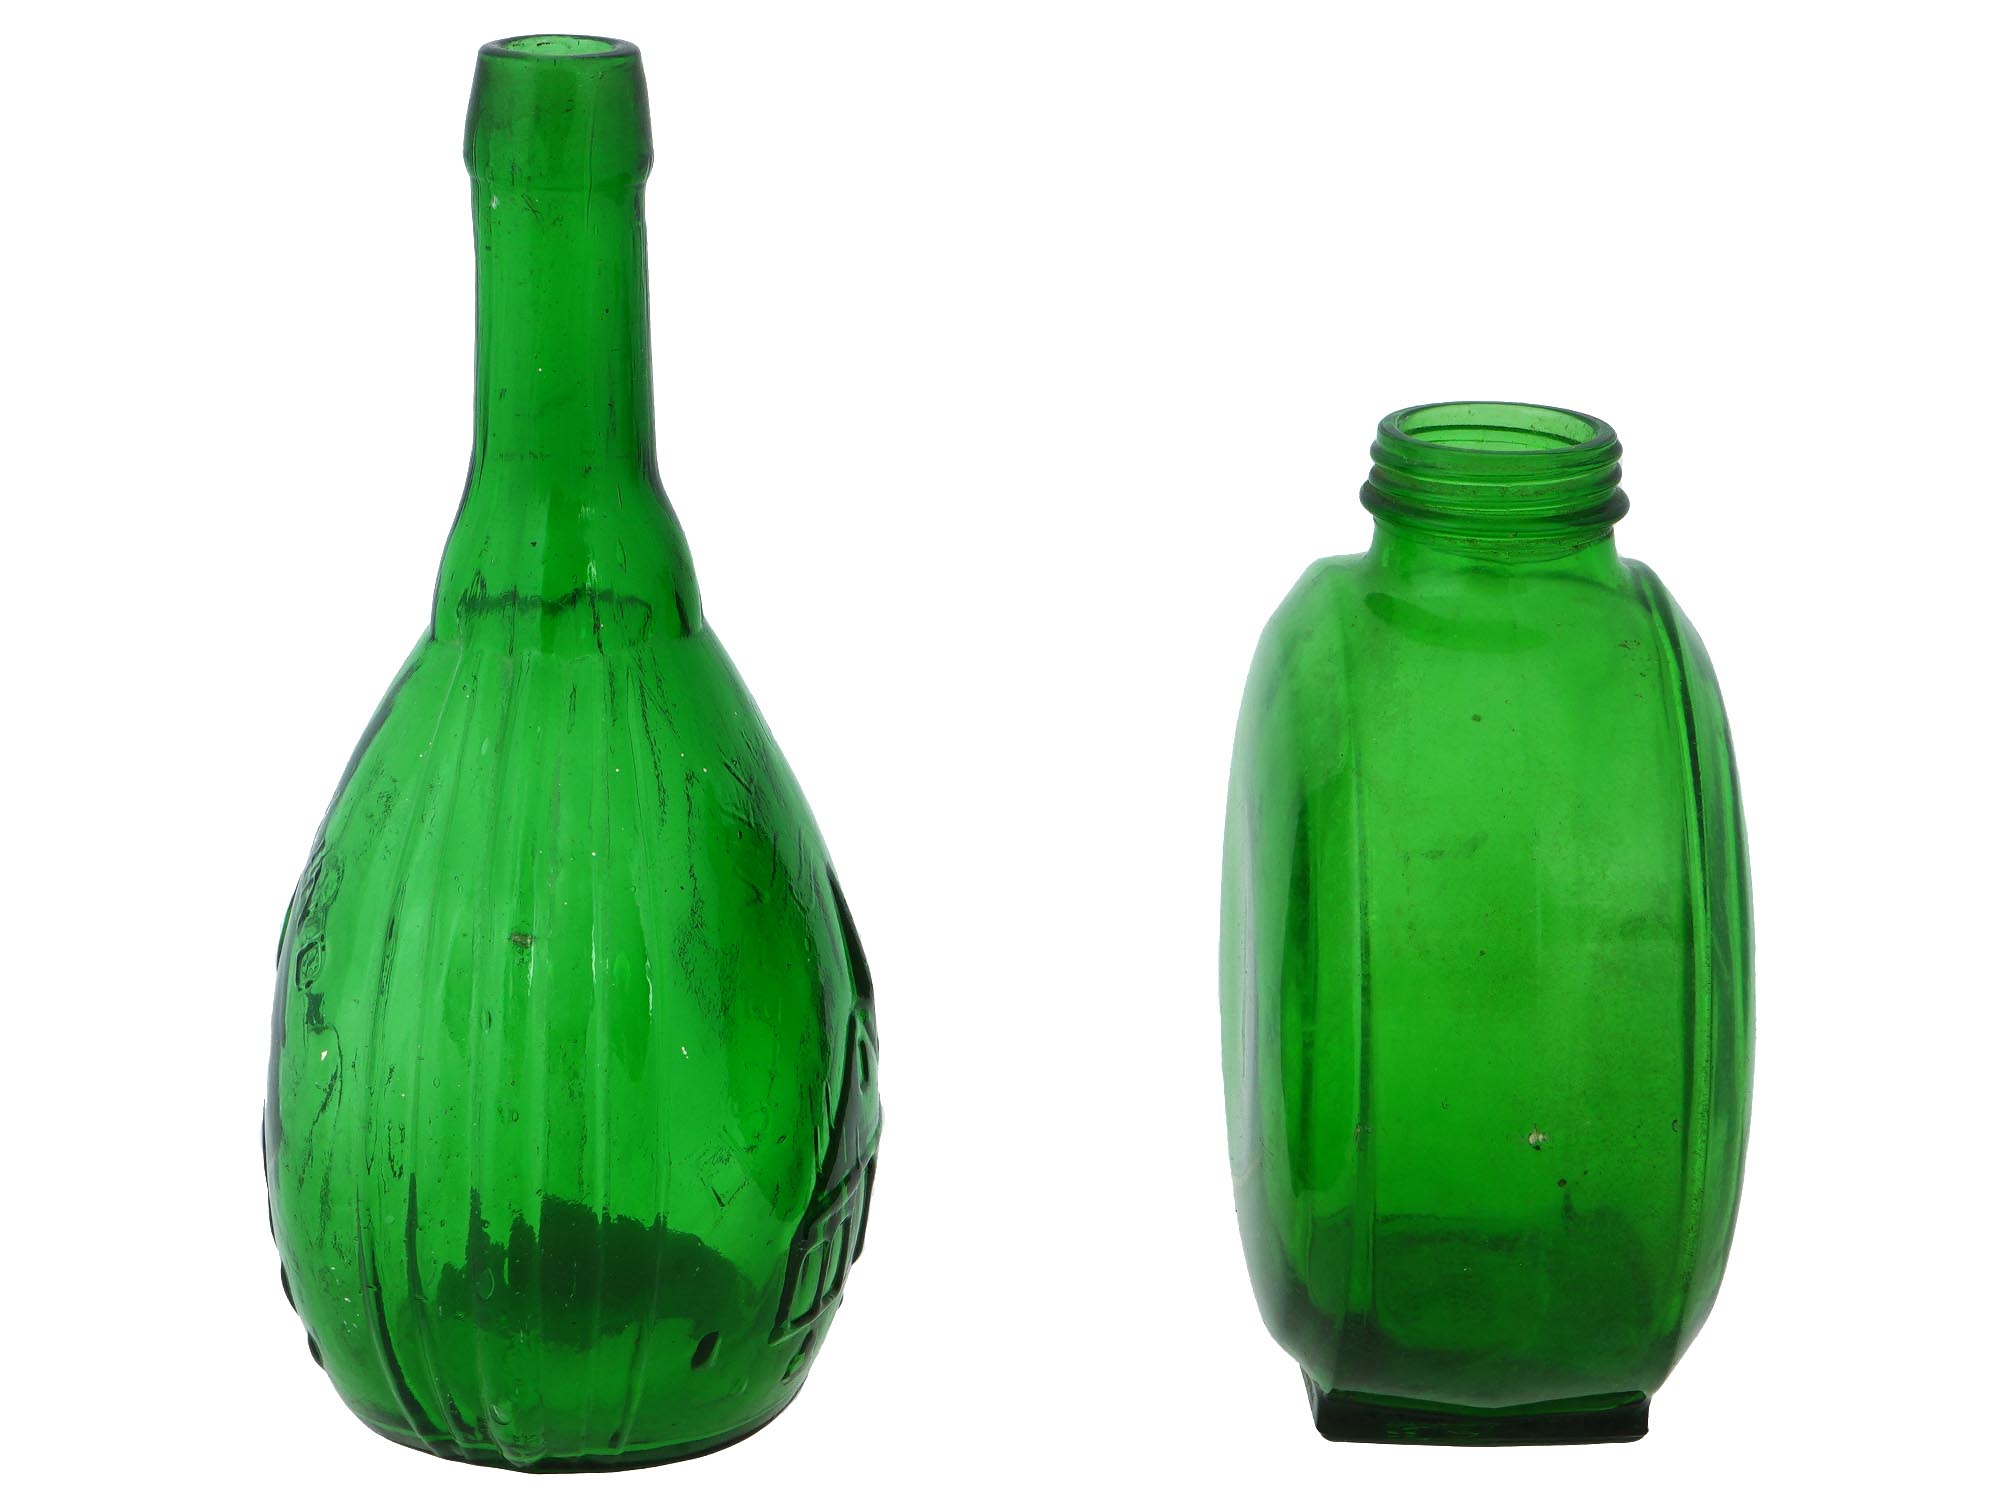 VINTAGE GREEN GLASS BOTTLES SUNSWEET AND RELIEF IMAGES PIC-4